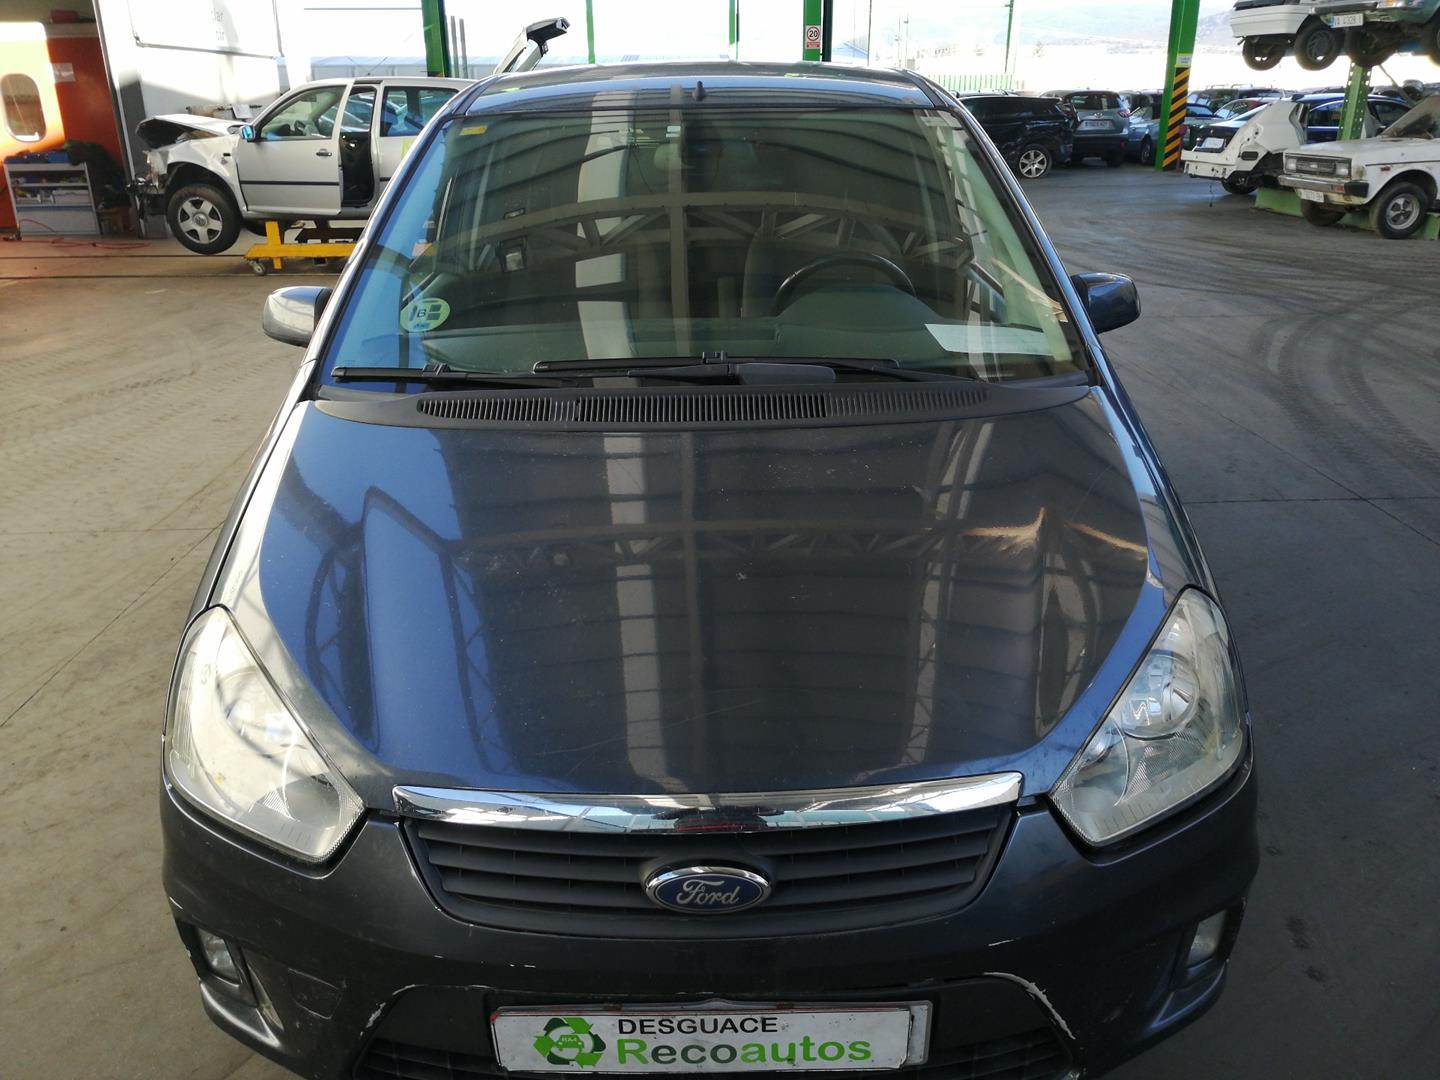 FORD C-Max 1 generation (2003-2010) ABS blokas 8M512C405AA, 10020603224, ATE 24201787